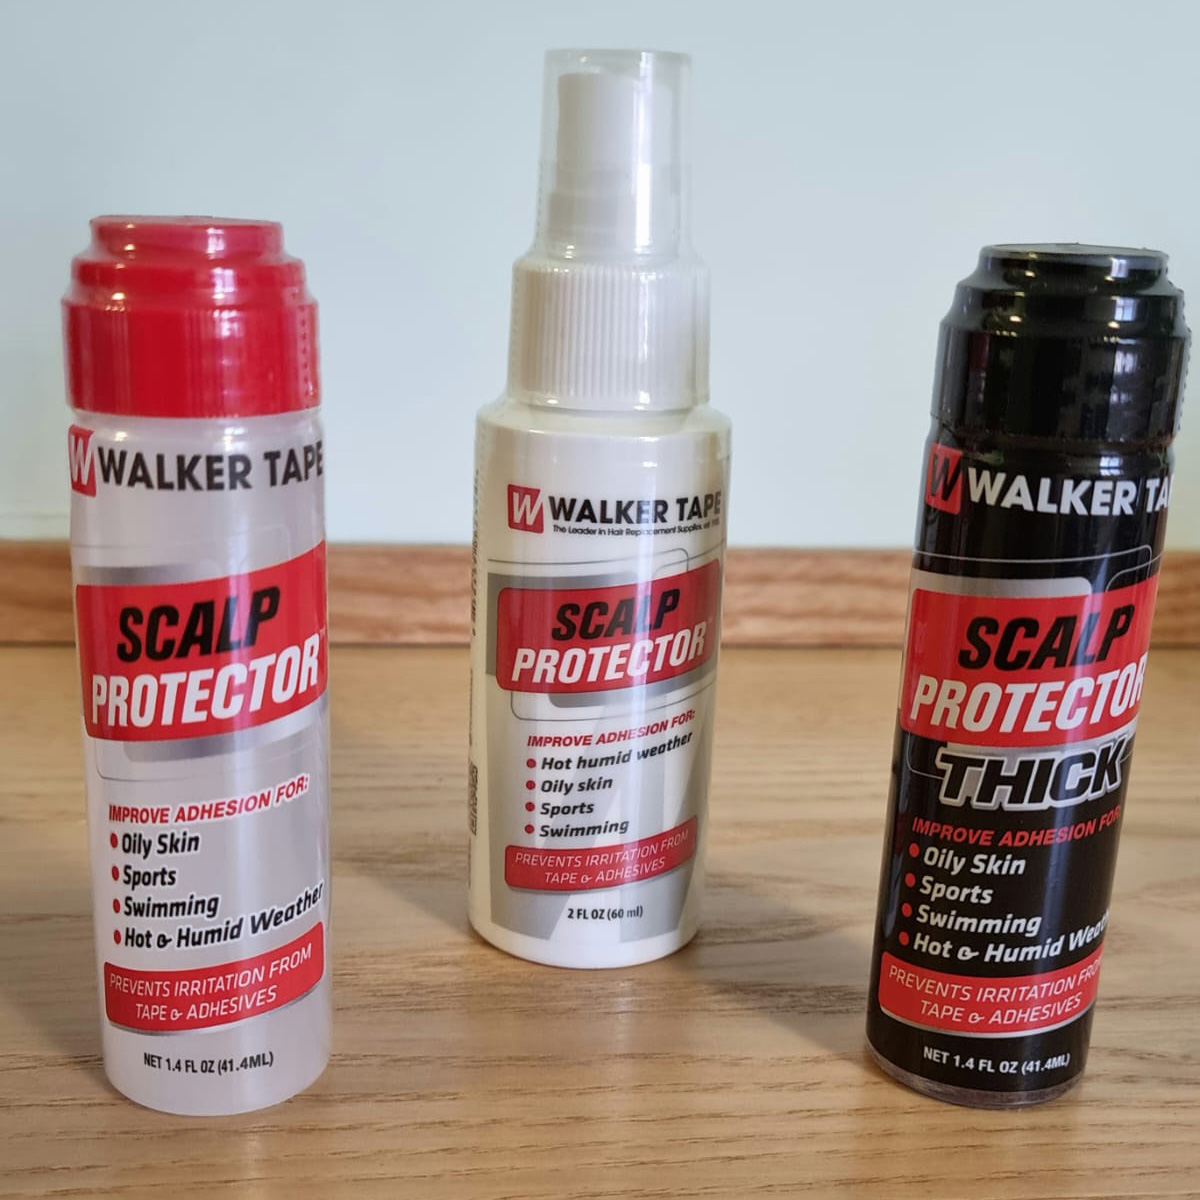 Walker tape Scalp Protection products in Manchester